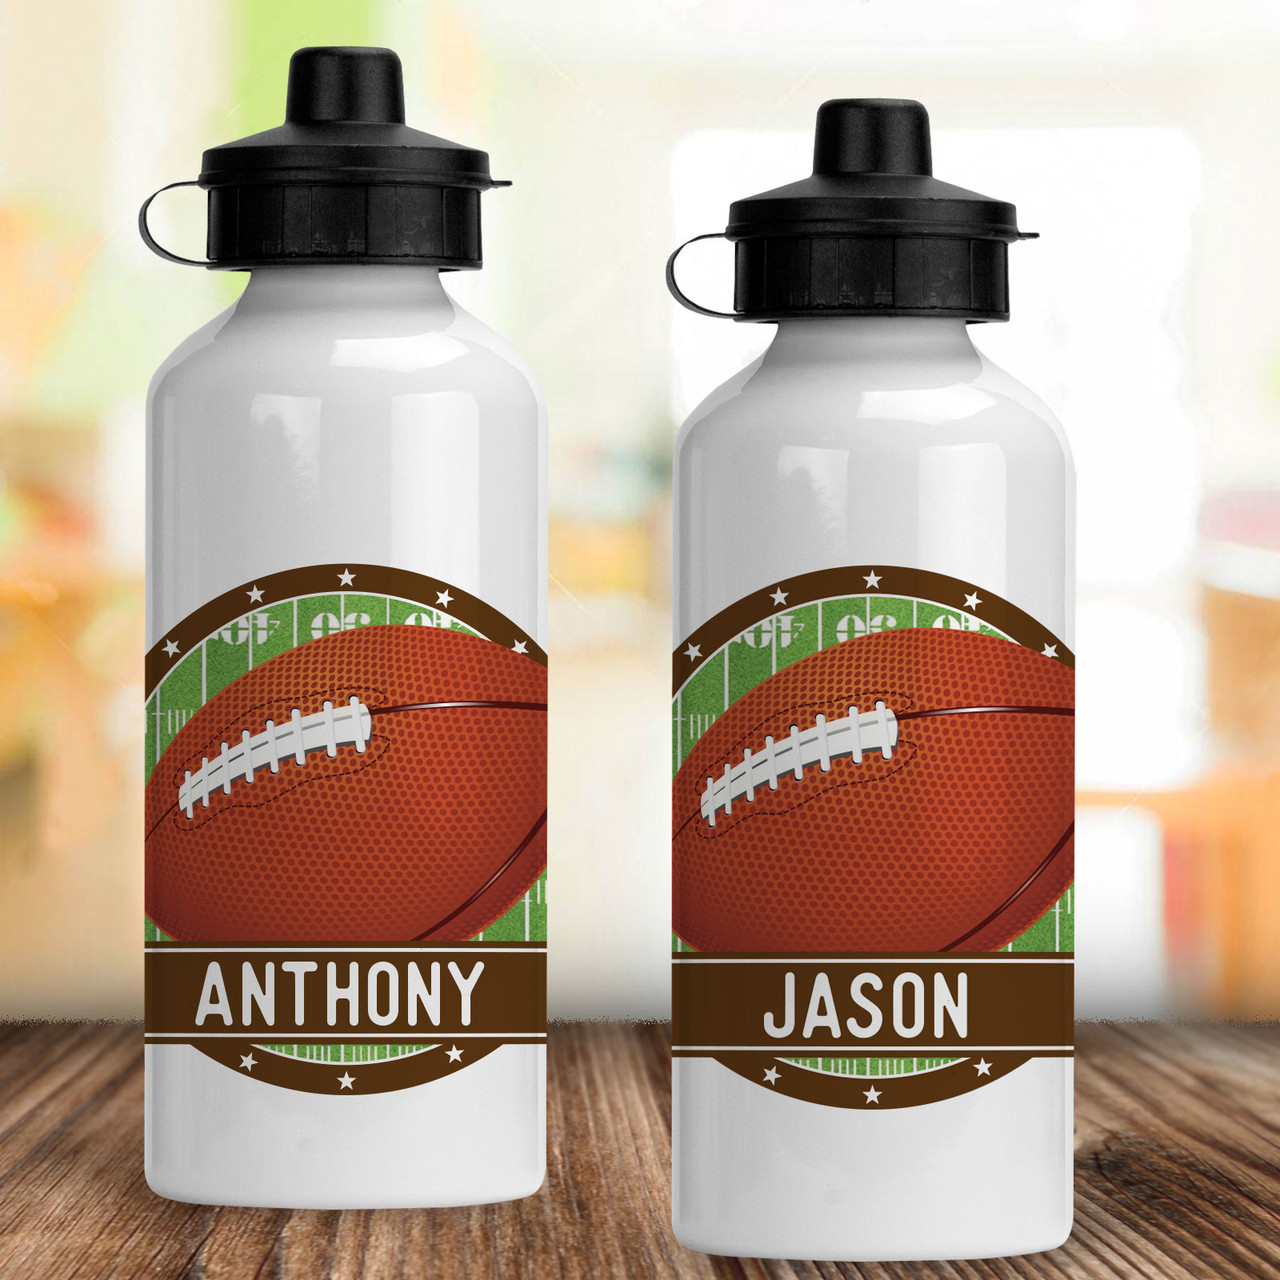 https://cdn11.bigcommerce.com/s-5grzuu6/images/stencil/1280x1280/products/292/30196/Football-Water-Bottle-Duo__56491.1671905285.jpg?c=2